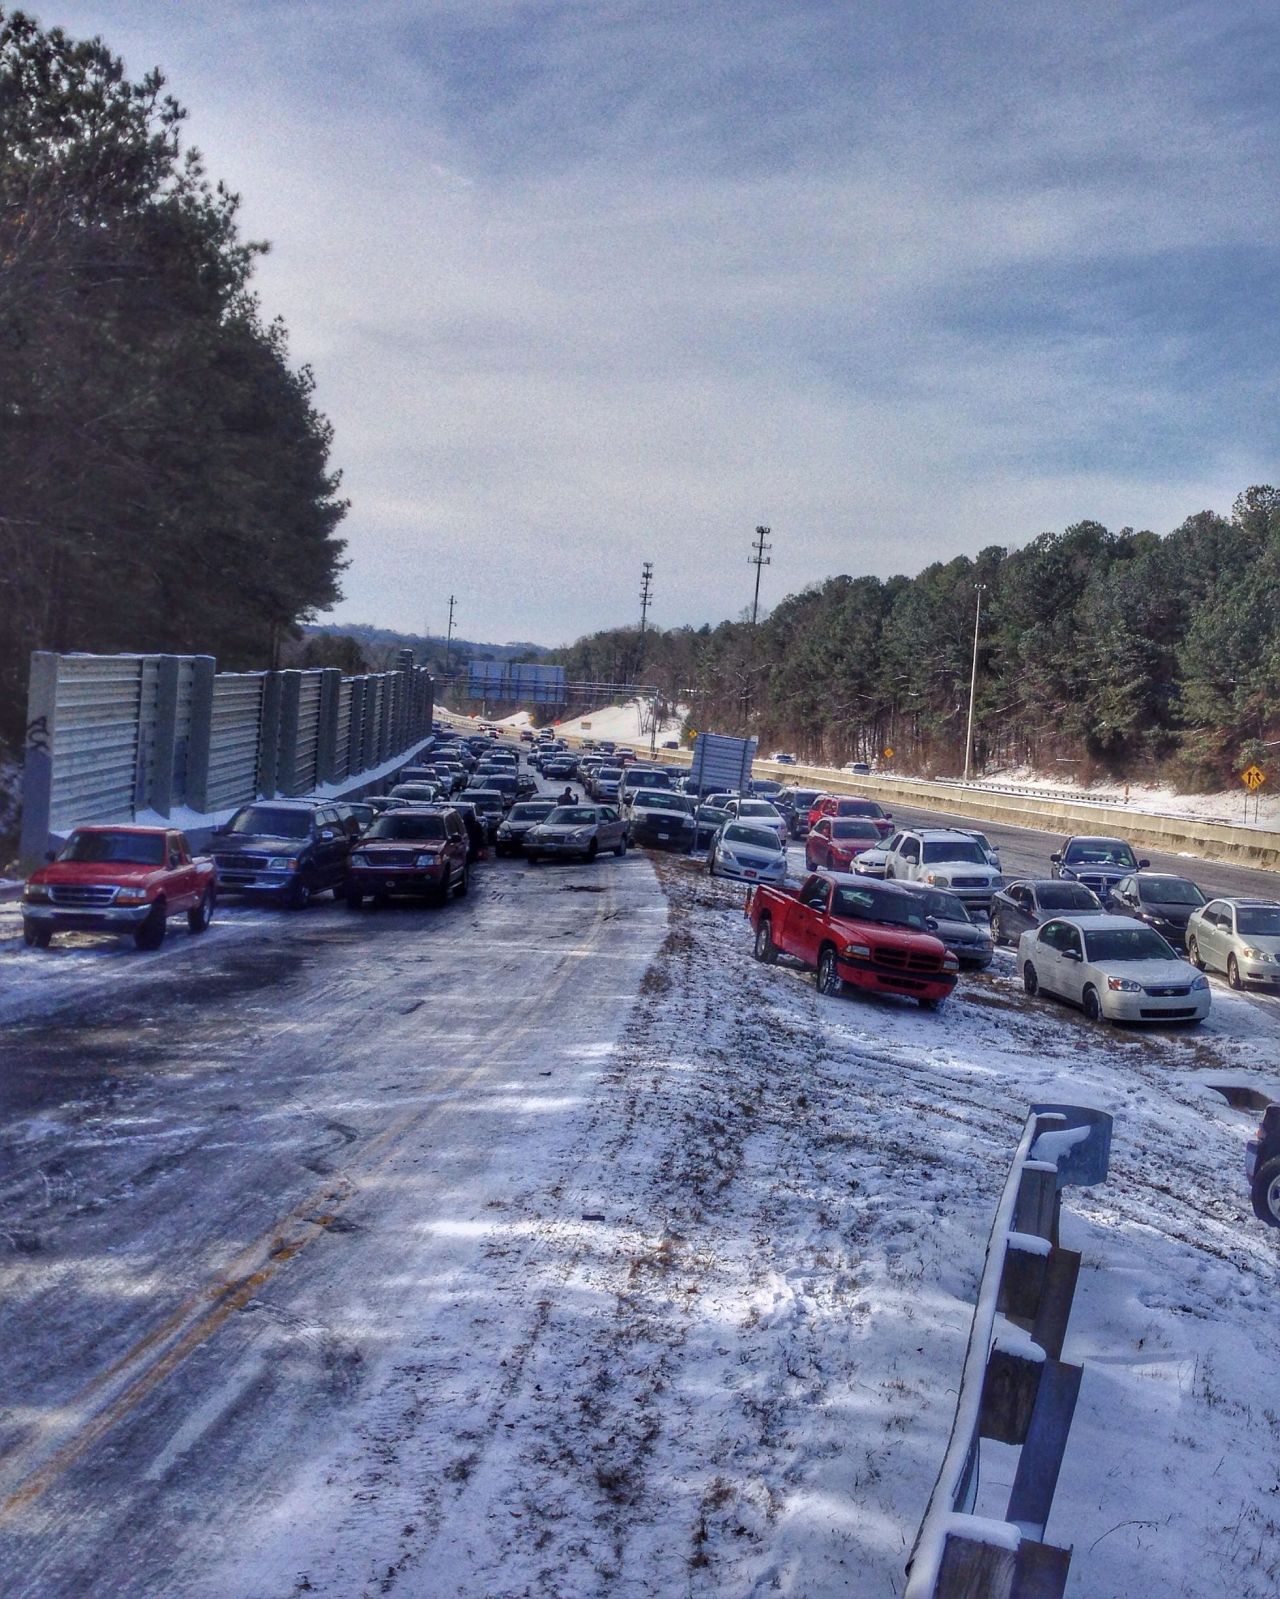 While walking to the grocery store in Roswell, Georgia, Smith Culberson came across <a href="http://ireport.cnn.com/docs/DOC-1079497">an entire highway of abandoned vehicles</a>. "Most cars couldn't drive up the exit ramp because of the ice," he said.